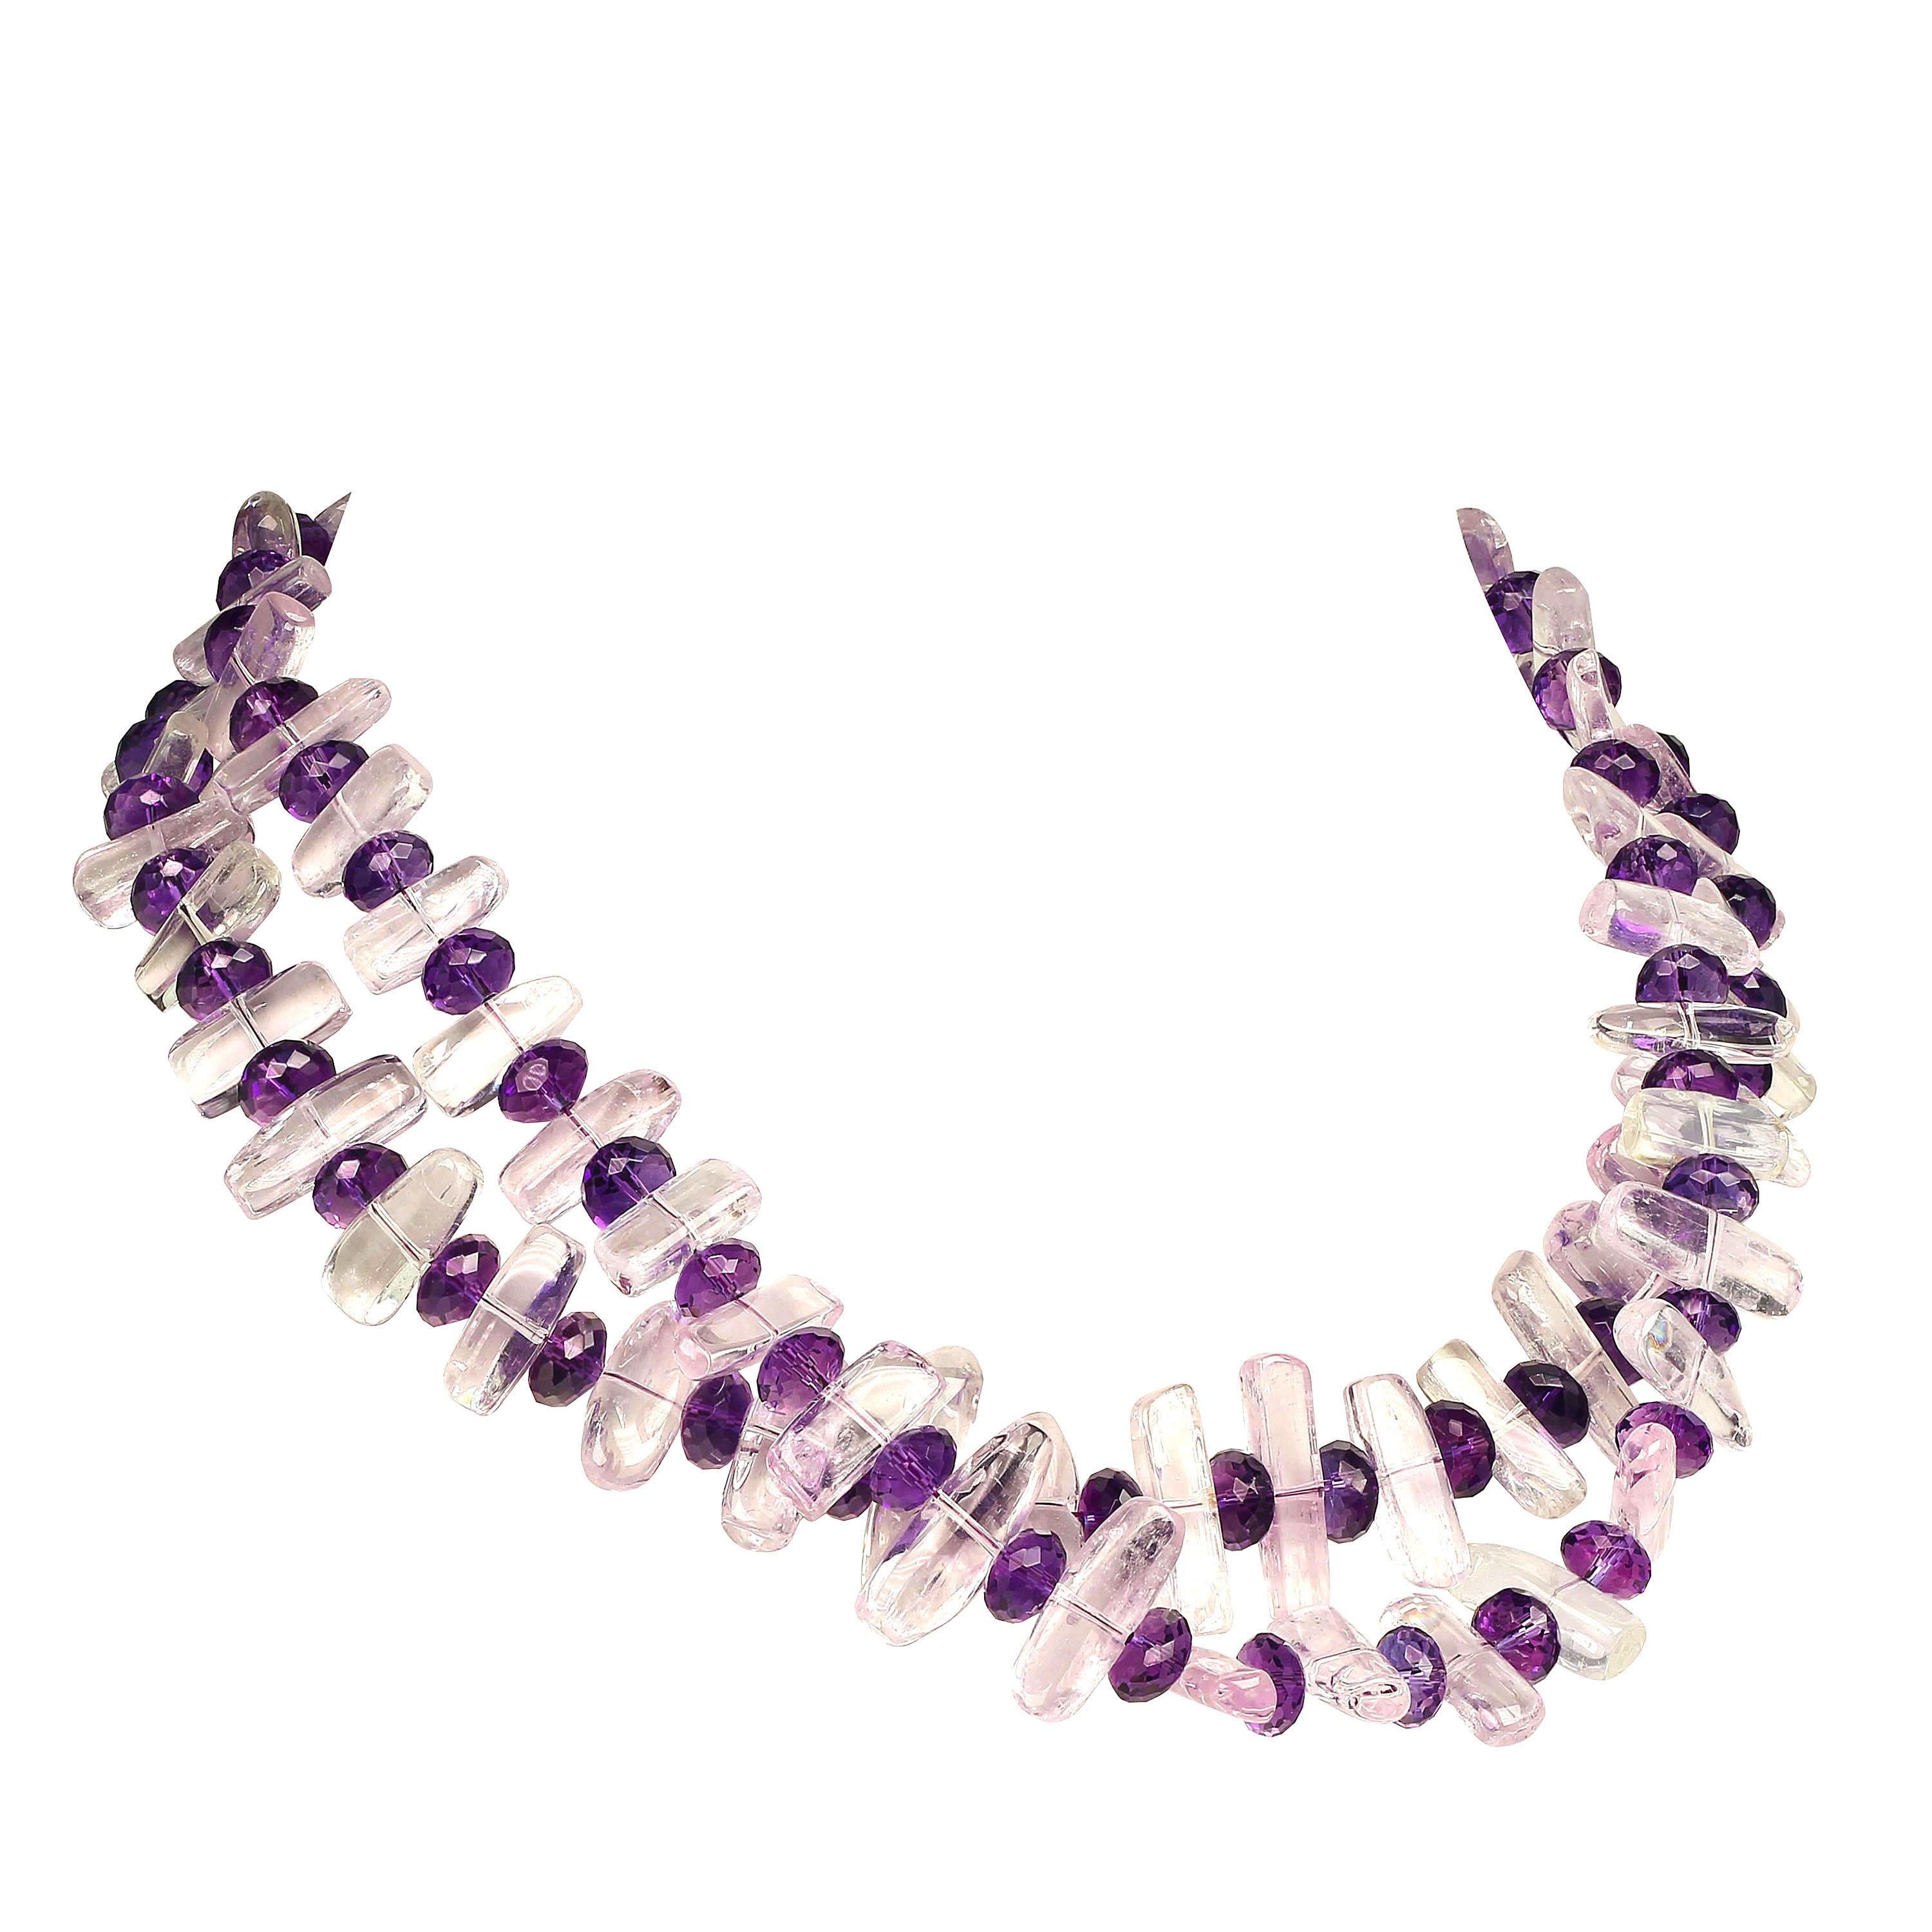 AJD Double Strand Necklace of Kunzite and Amethyst